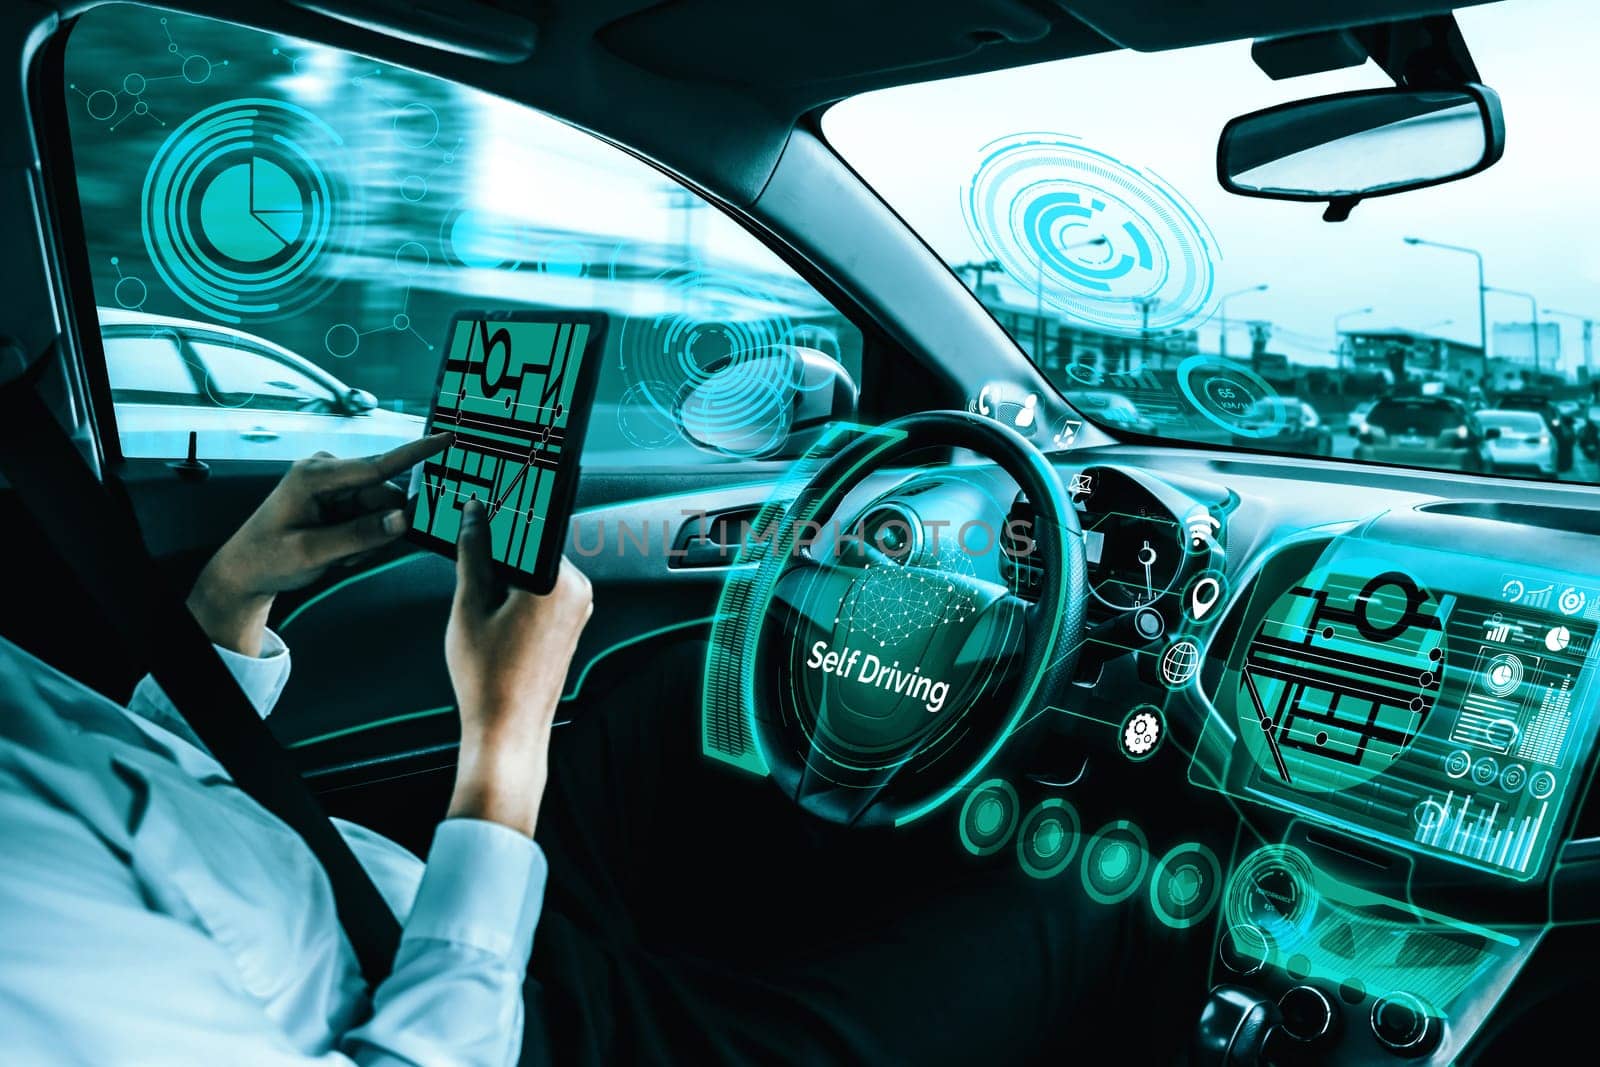 Self-driving autonomous car with relaxed young man sitting at driver seat is driving on busy highway road in the city. Concept of machine learning, artificial intelligence and augmented reality. uds